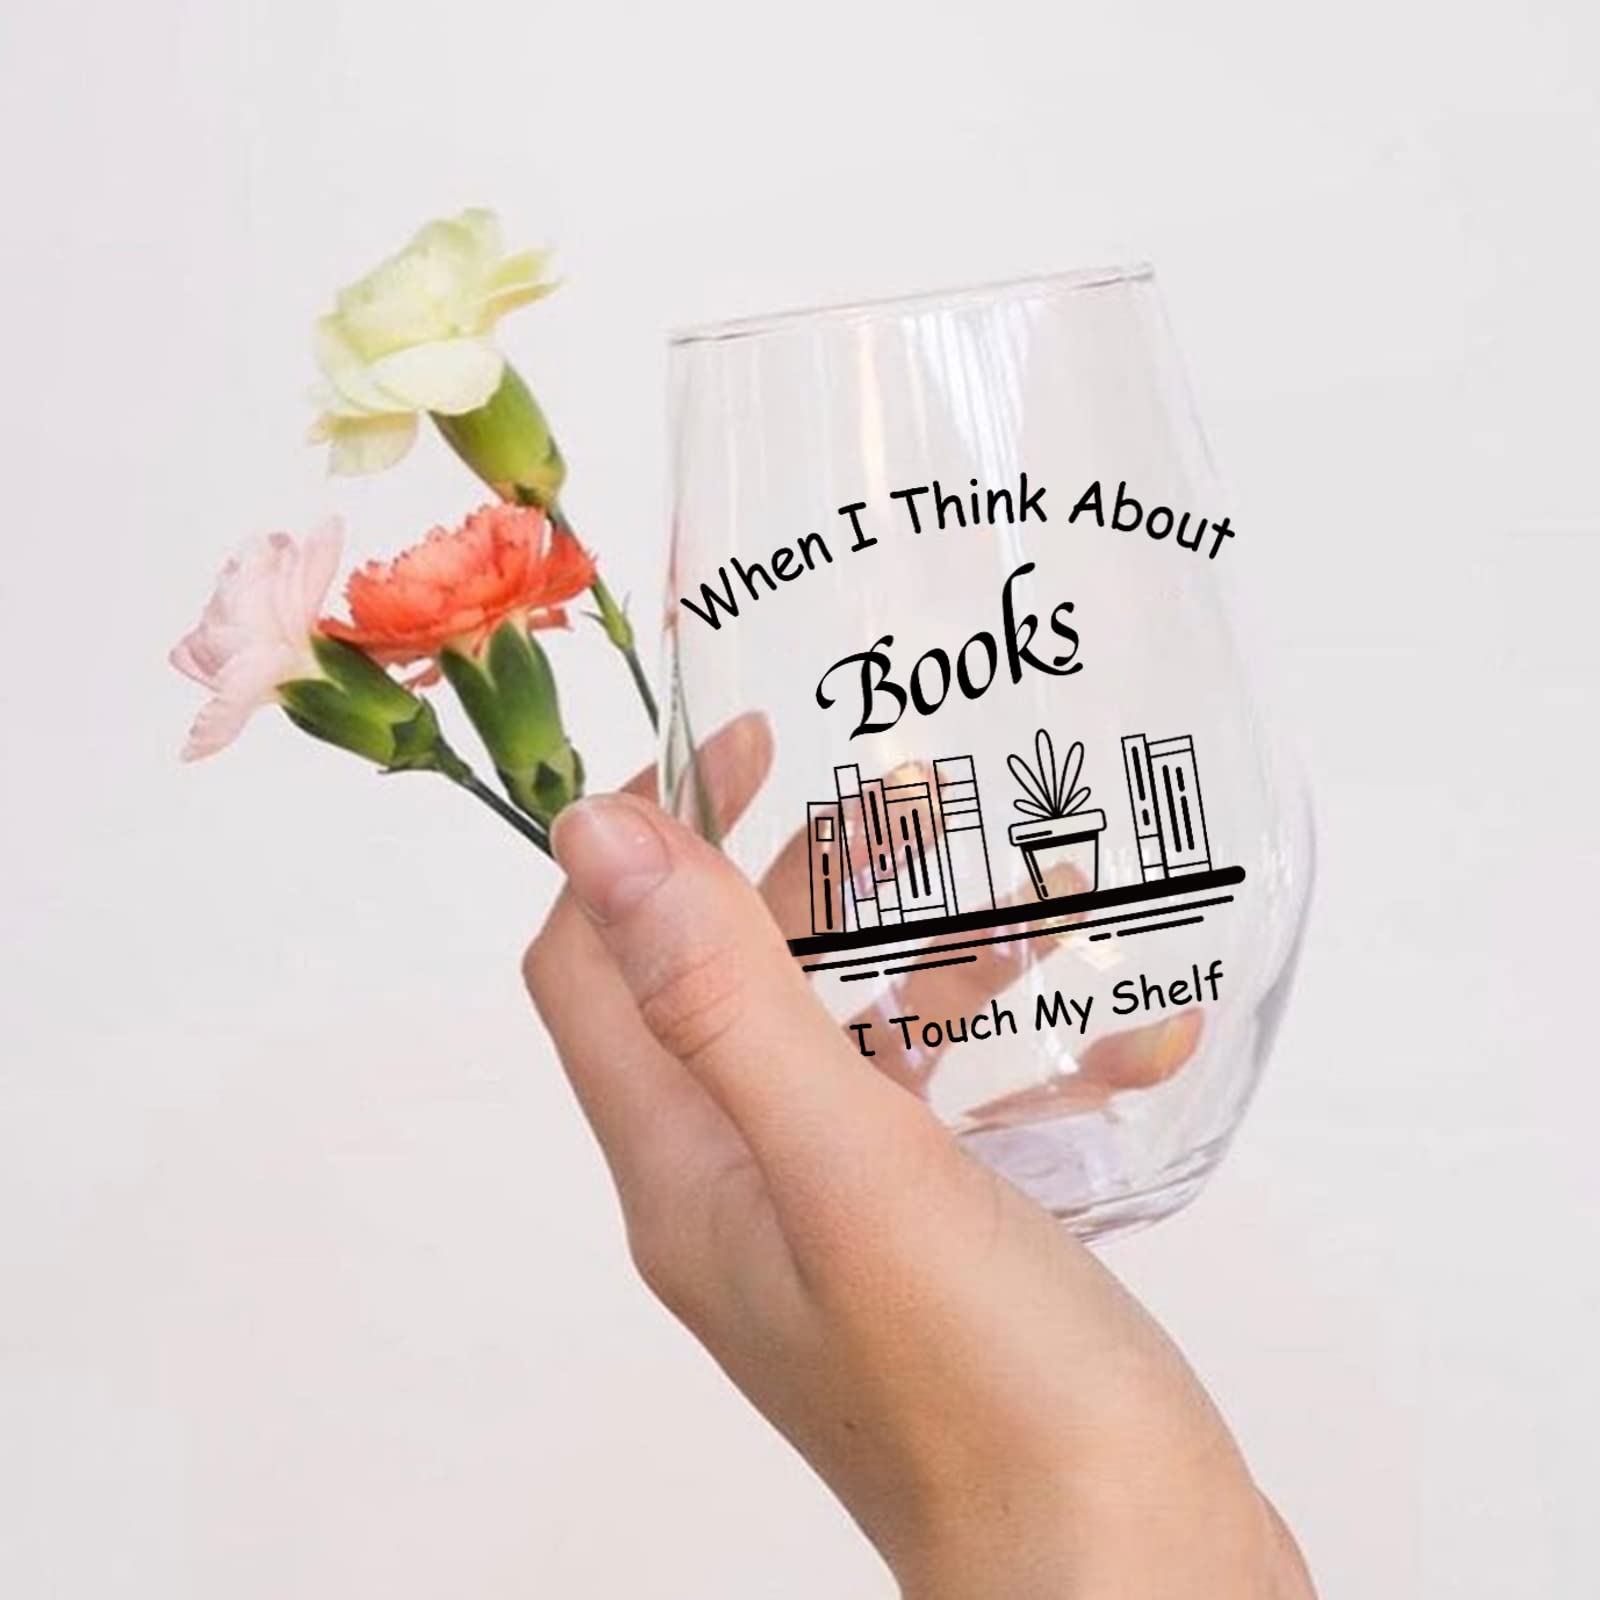 Physkoa Gifts for book lovers,Funny Book Club Stemless Wine Glass Gifts for Reader Lovers, Librarian,Teacher, Nerd Gift Idea, Inspirational Birthday Gifts for Friends-Large 18.5 oz